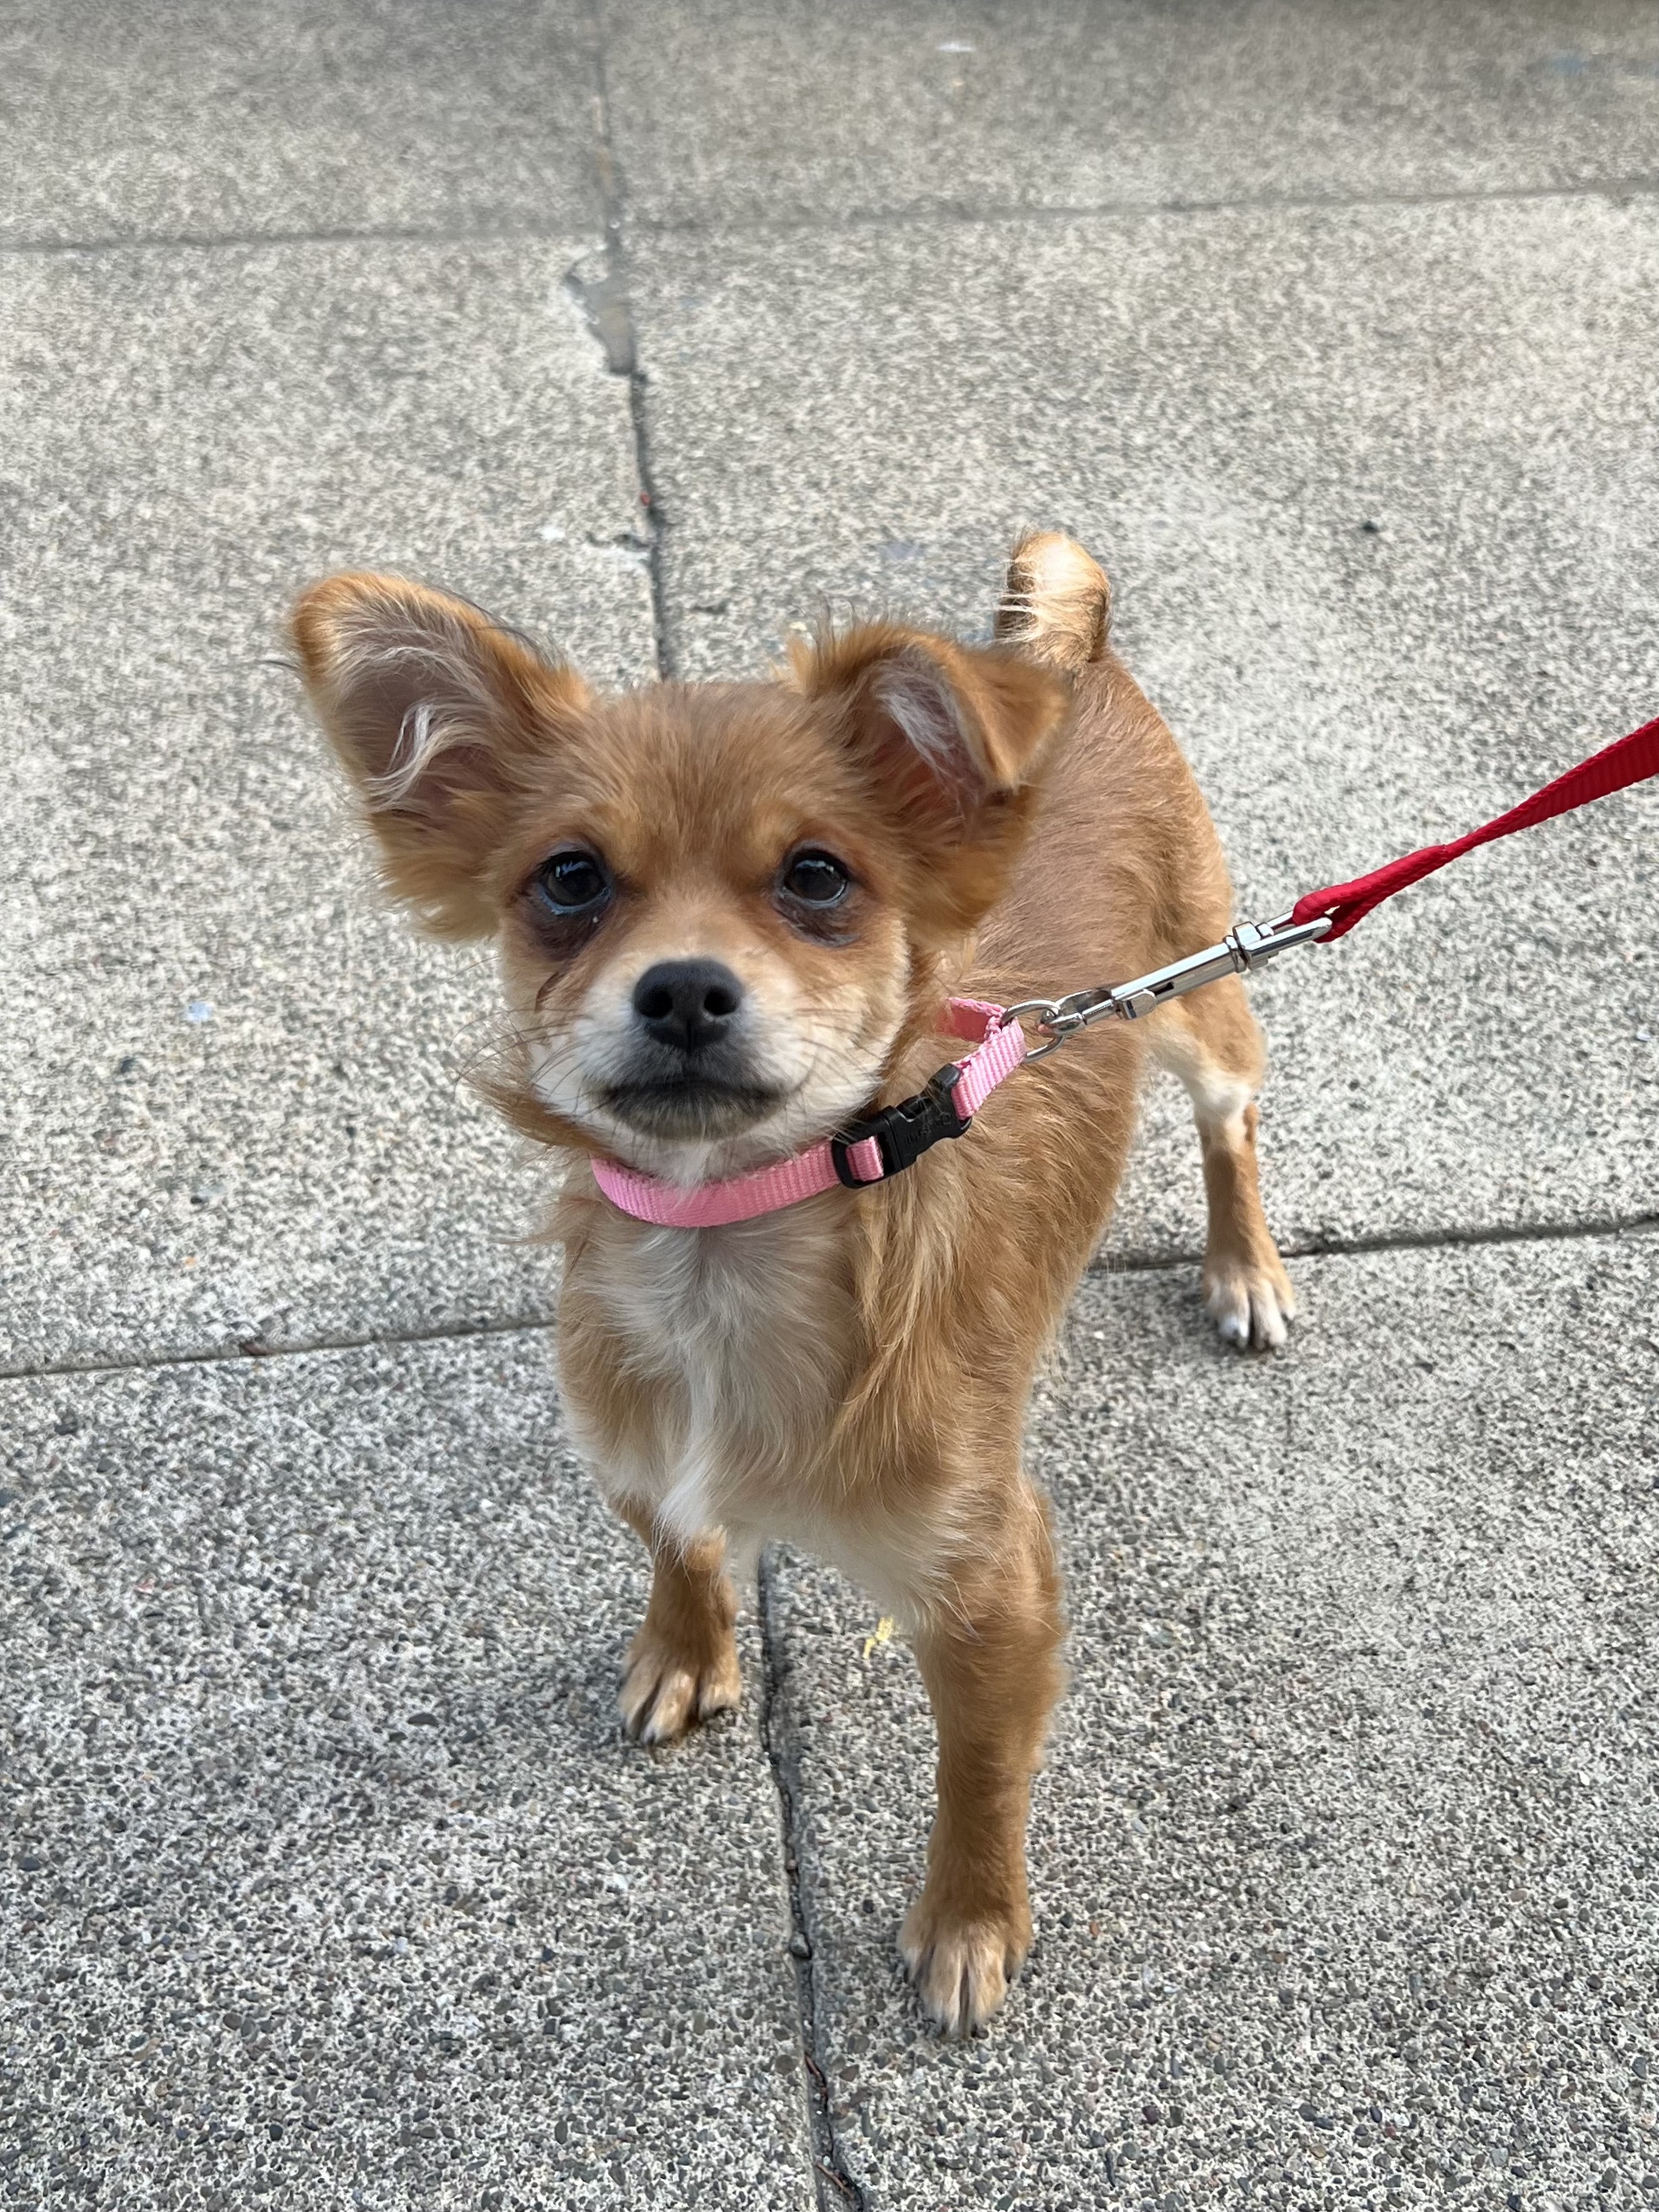 Chihuahua Pomeranian Mix Puppy With One Flopped Ear